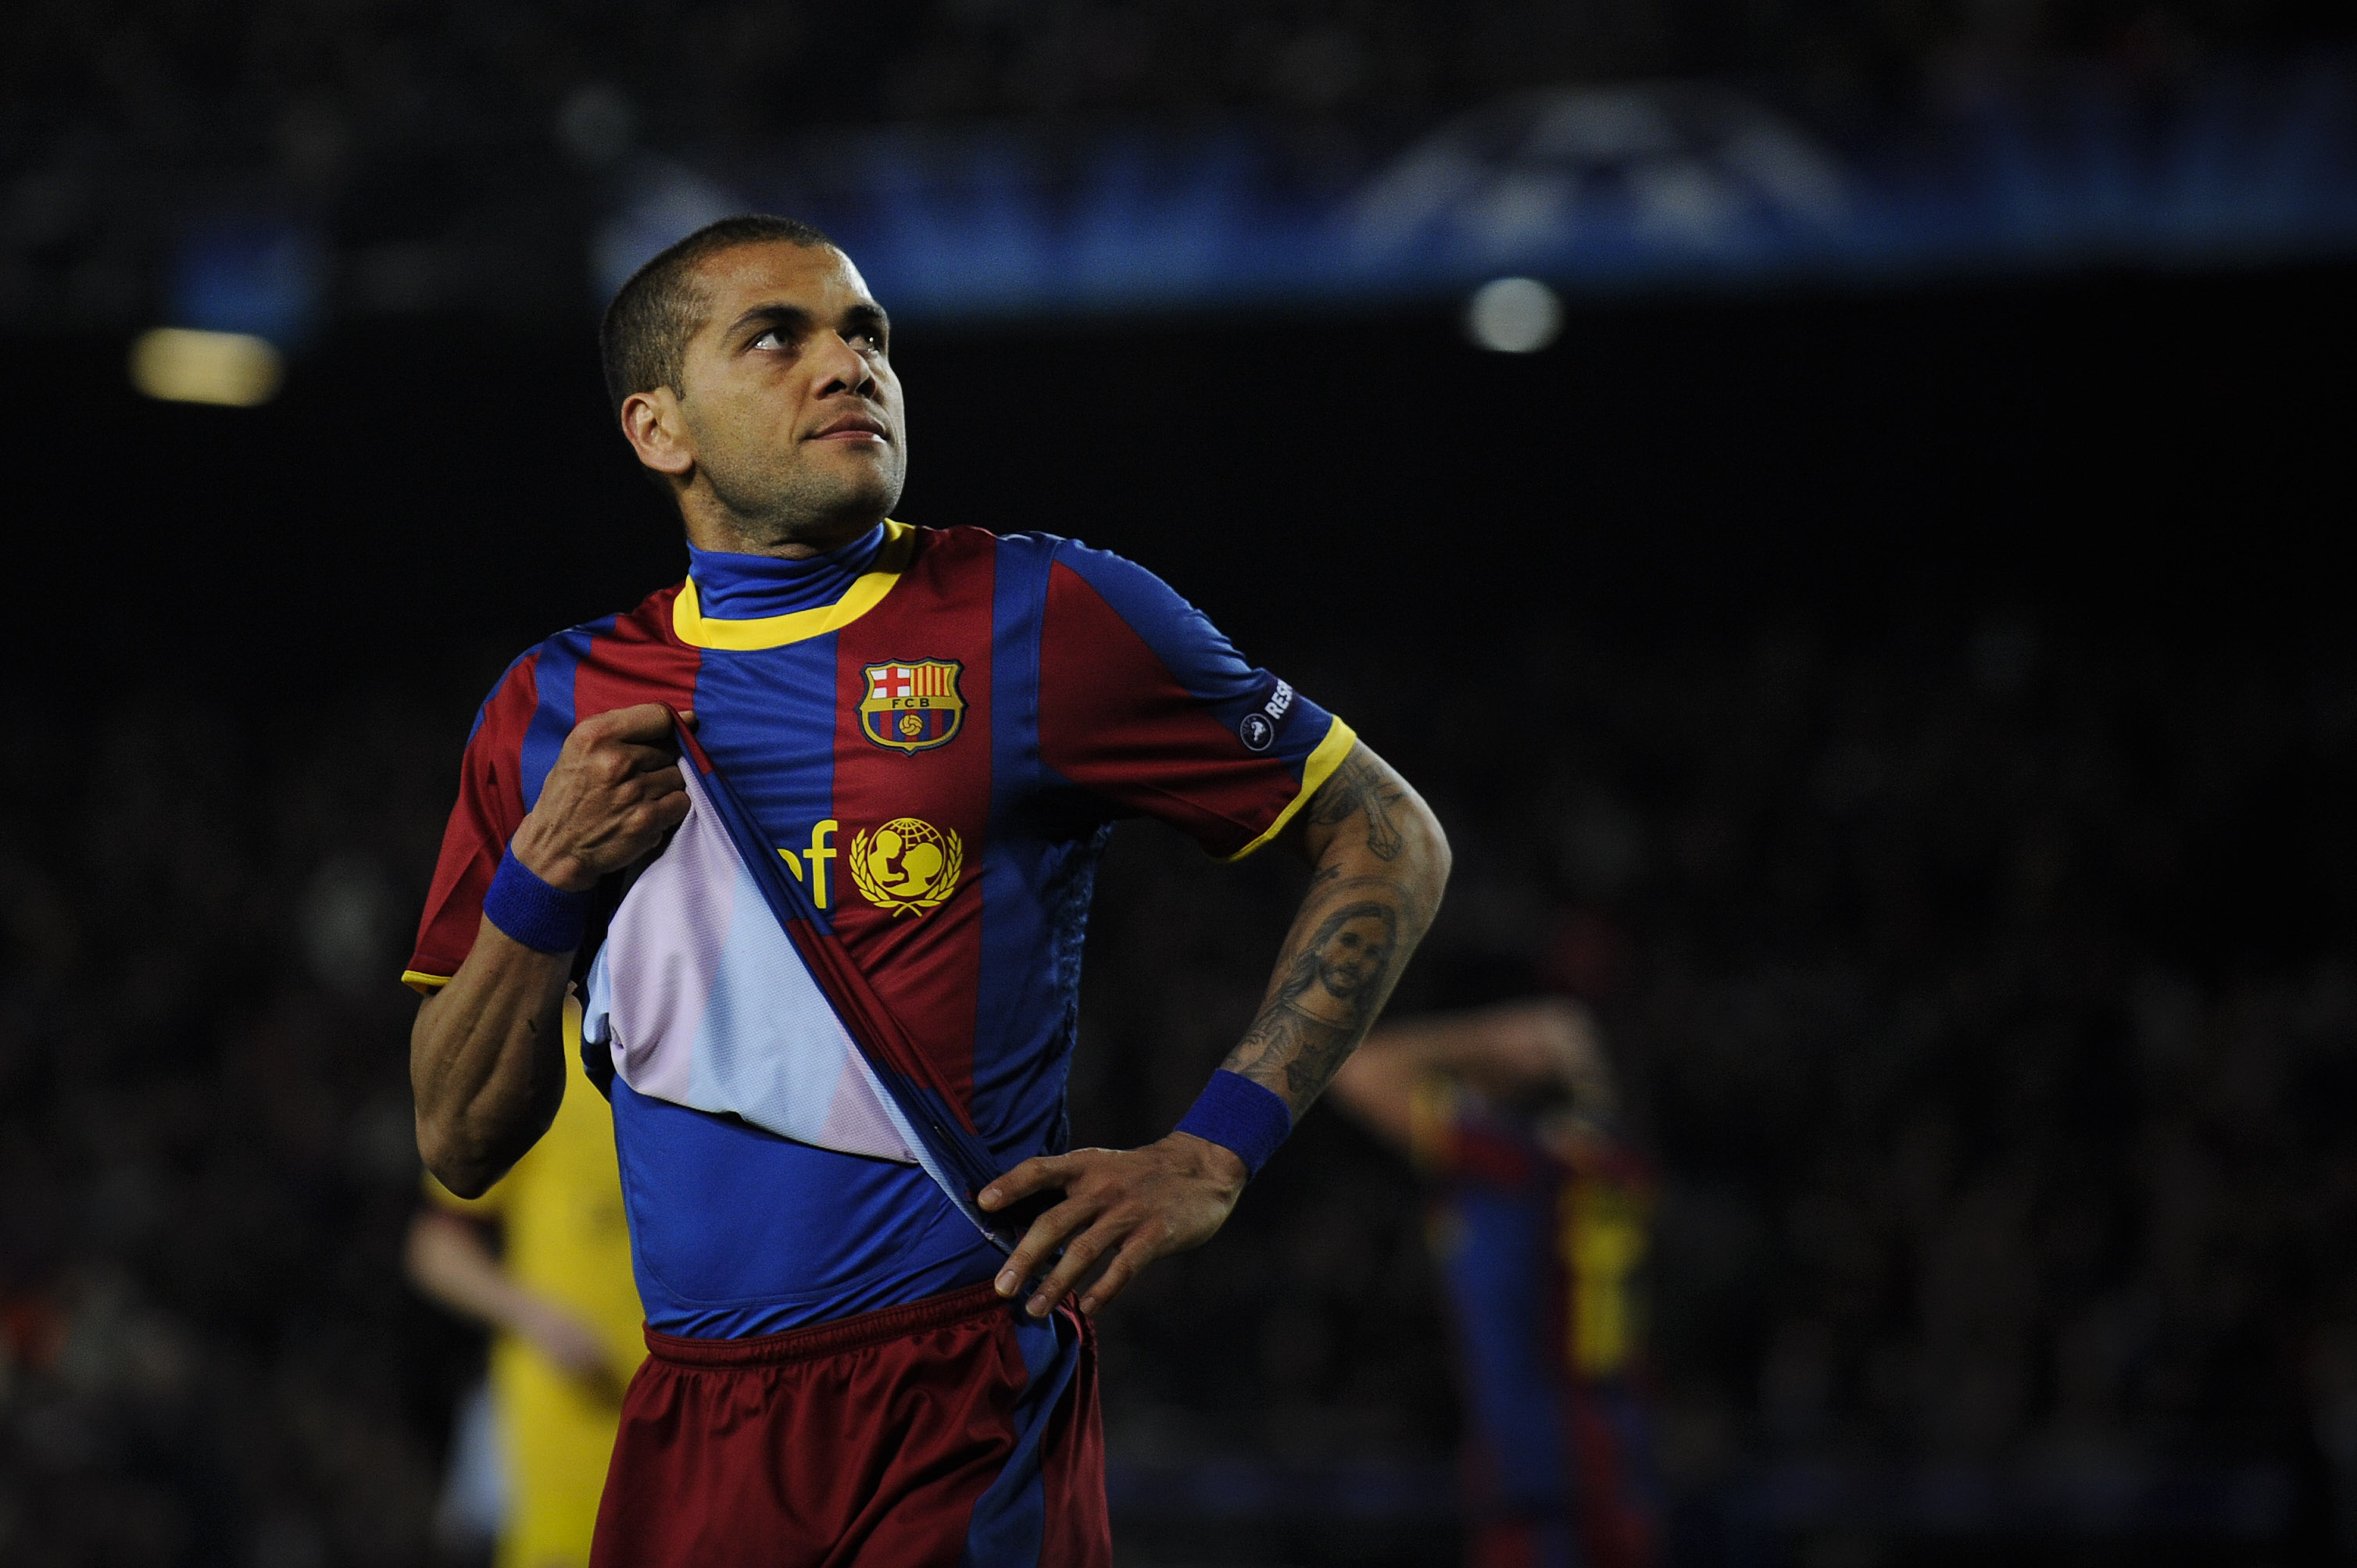 BARCELONA, SPAIN - MARCH 08:  Dani Alves of FC Barcelona looks on during the UEFA Champions League round of 16 second leg match between Barcelona and Arsenal at the Camp Nou stadium on March 8, 2011 in Barcelona, Spain.  (Photo by David Ramos/Getty Images